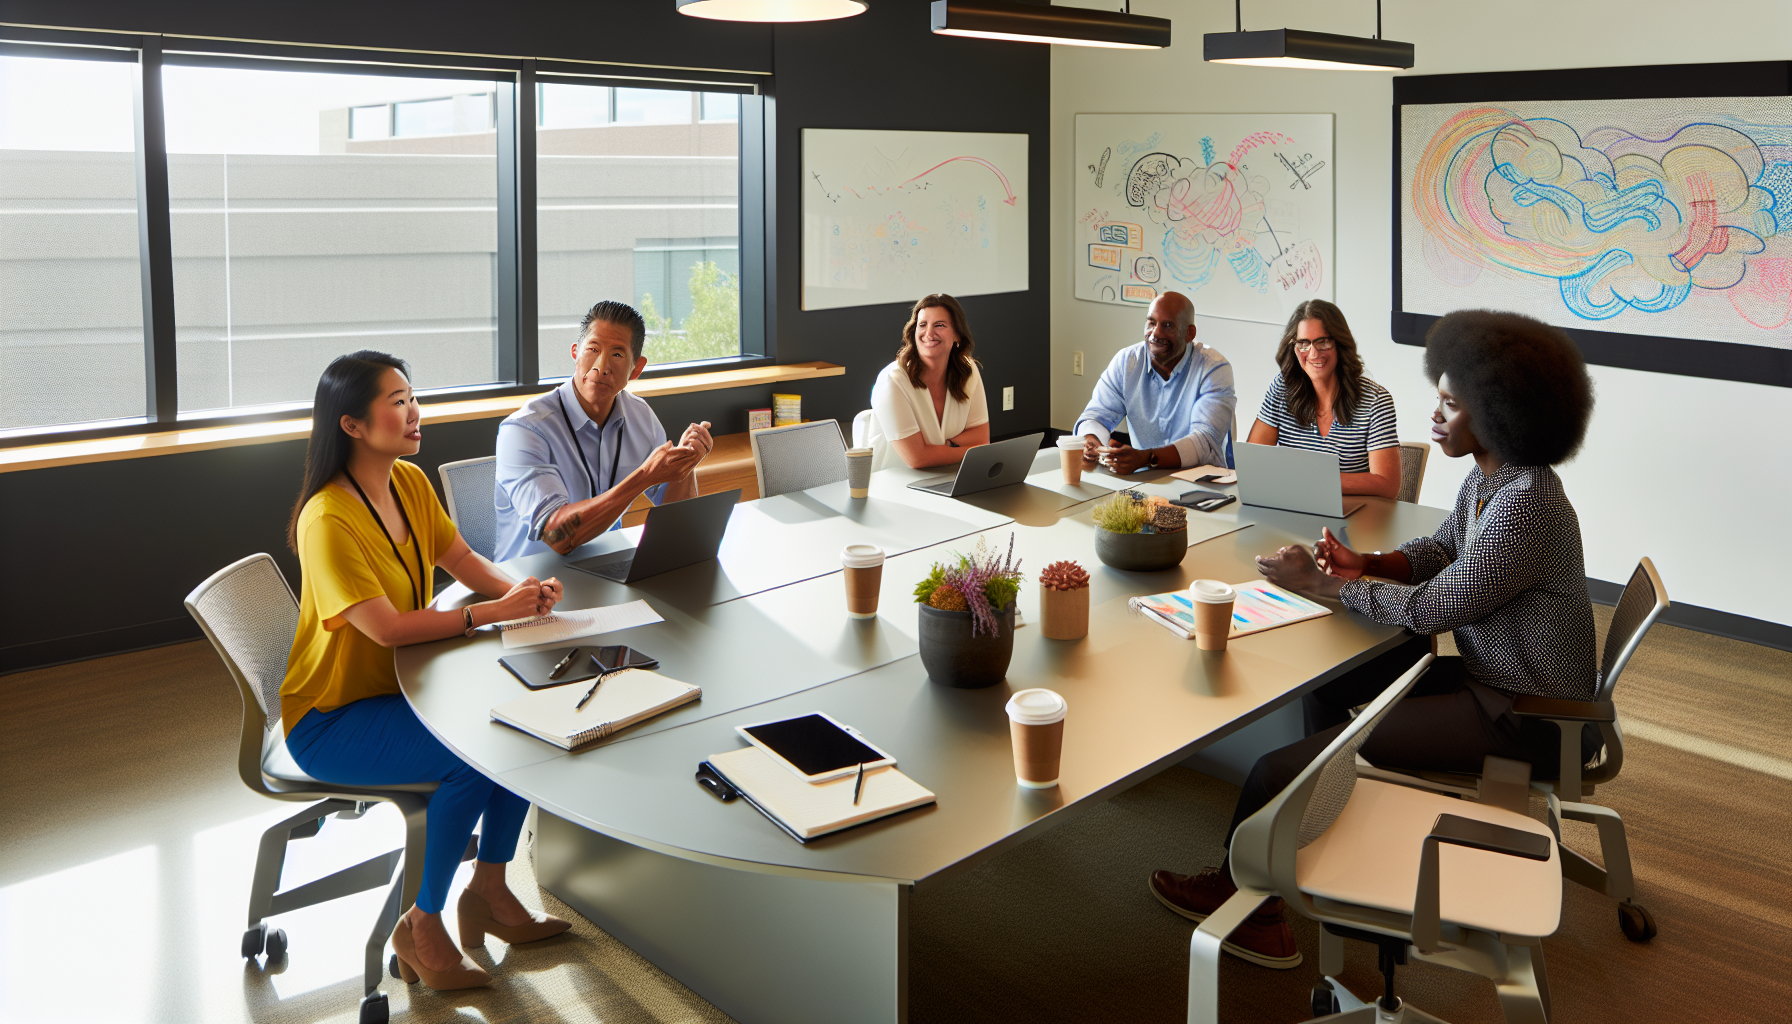 Diverse group of employees collaborating in a modern office setting